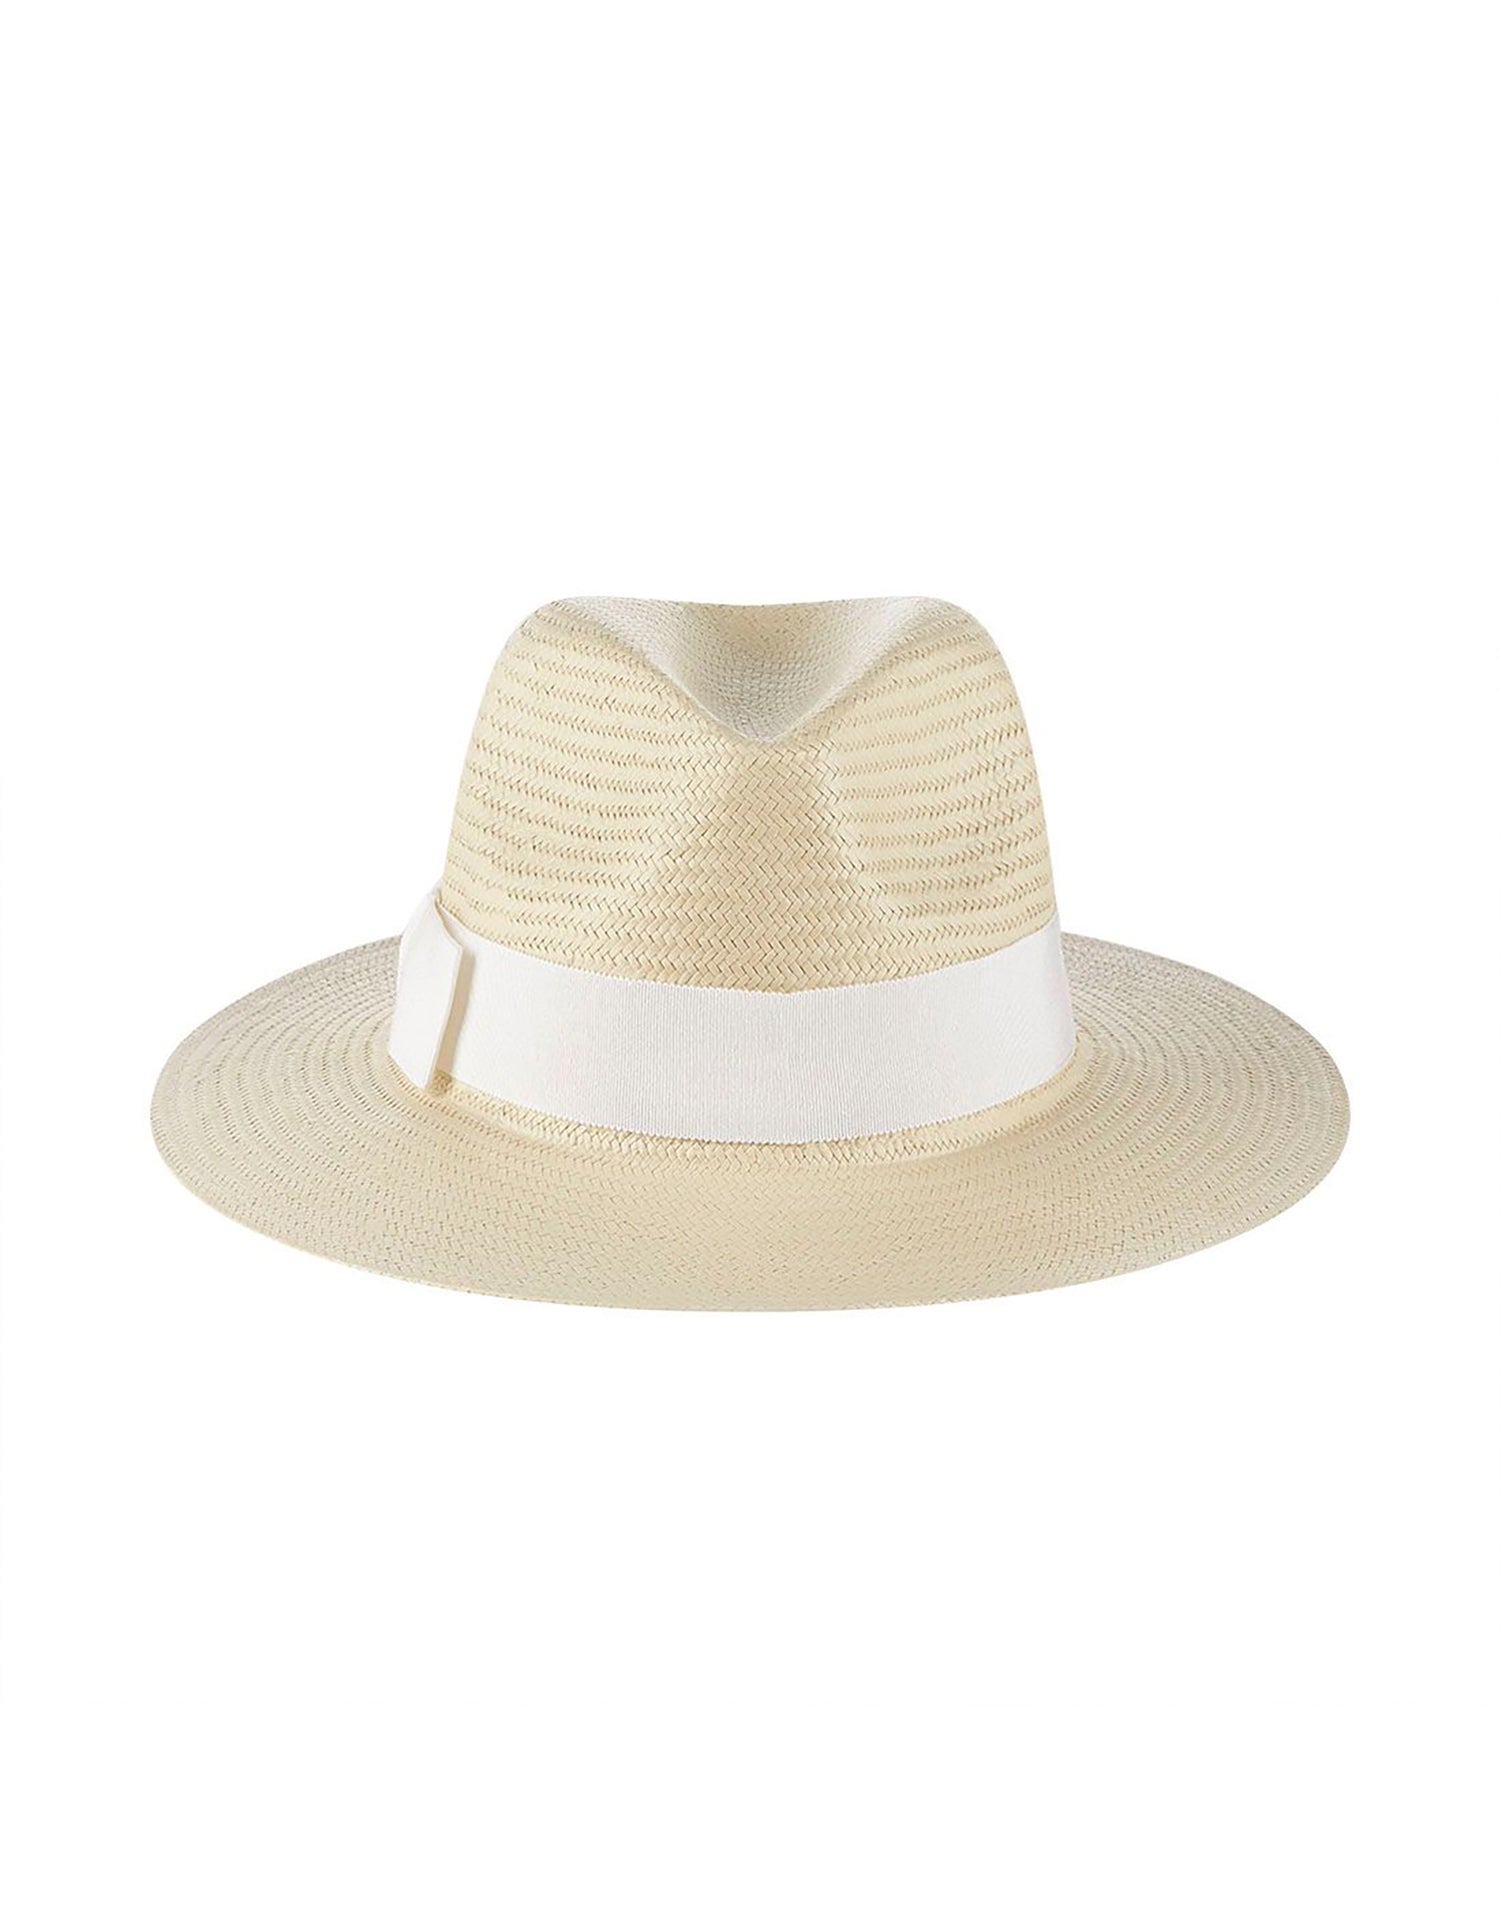 Margo Fedora in Natural/White by Florabella - Product View